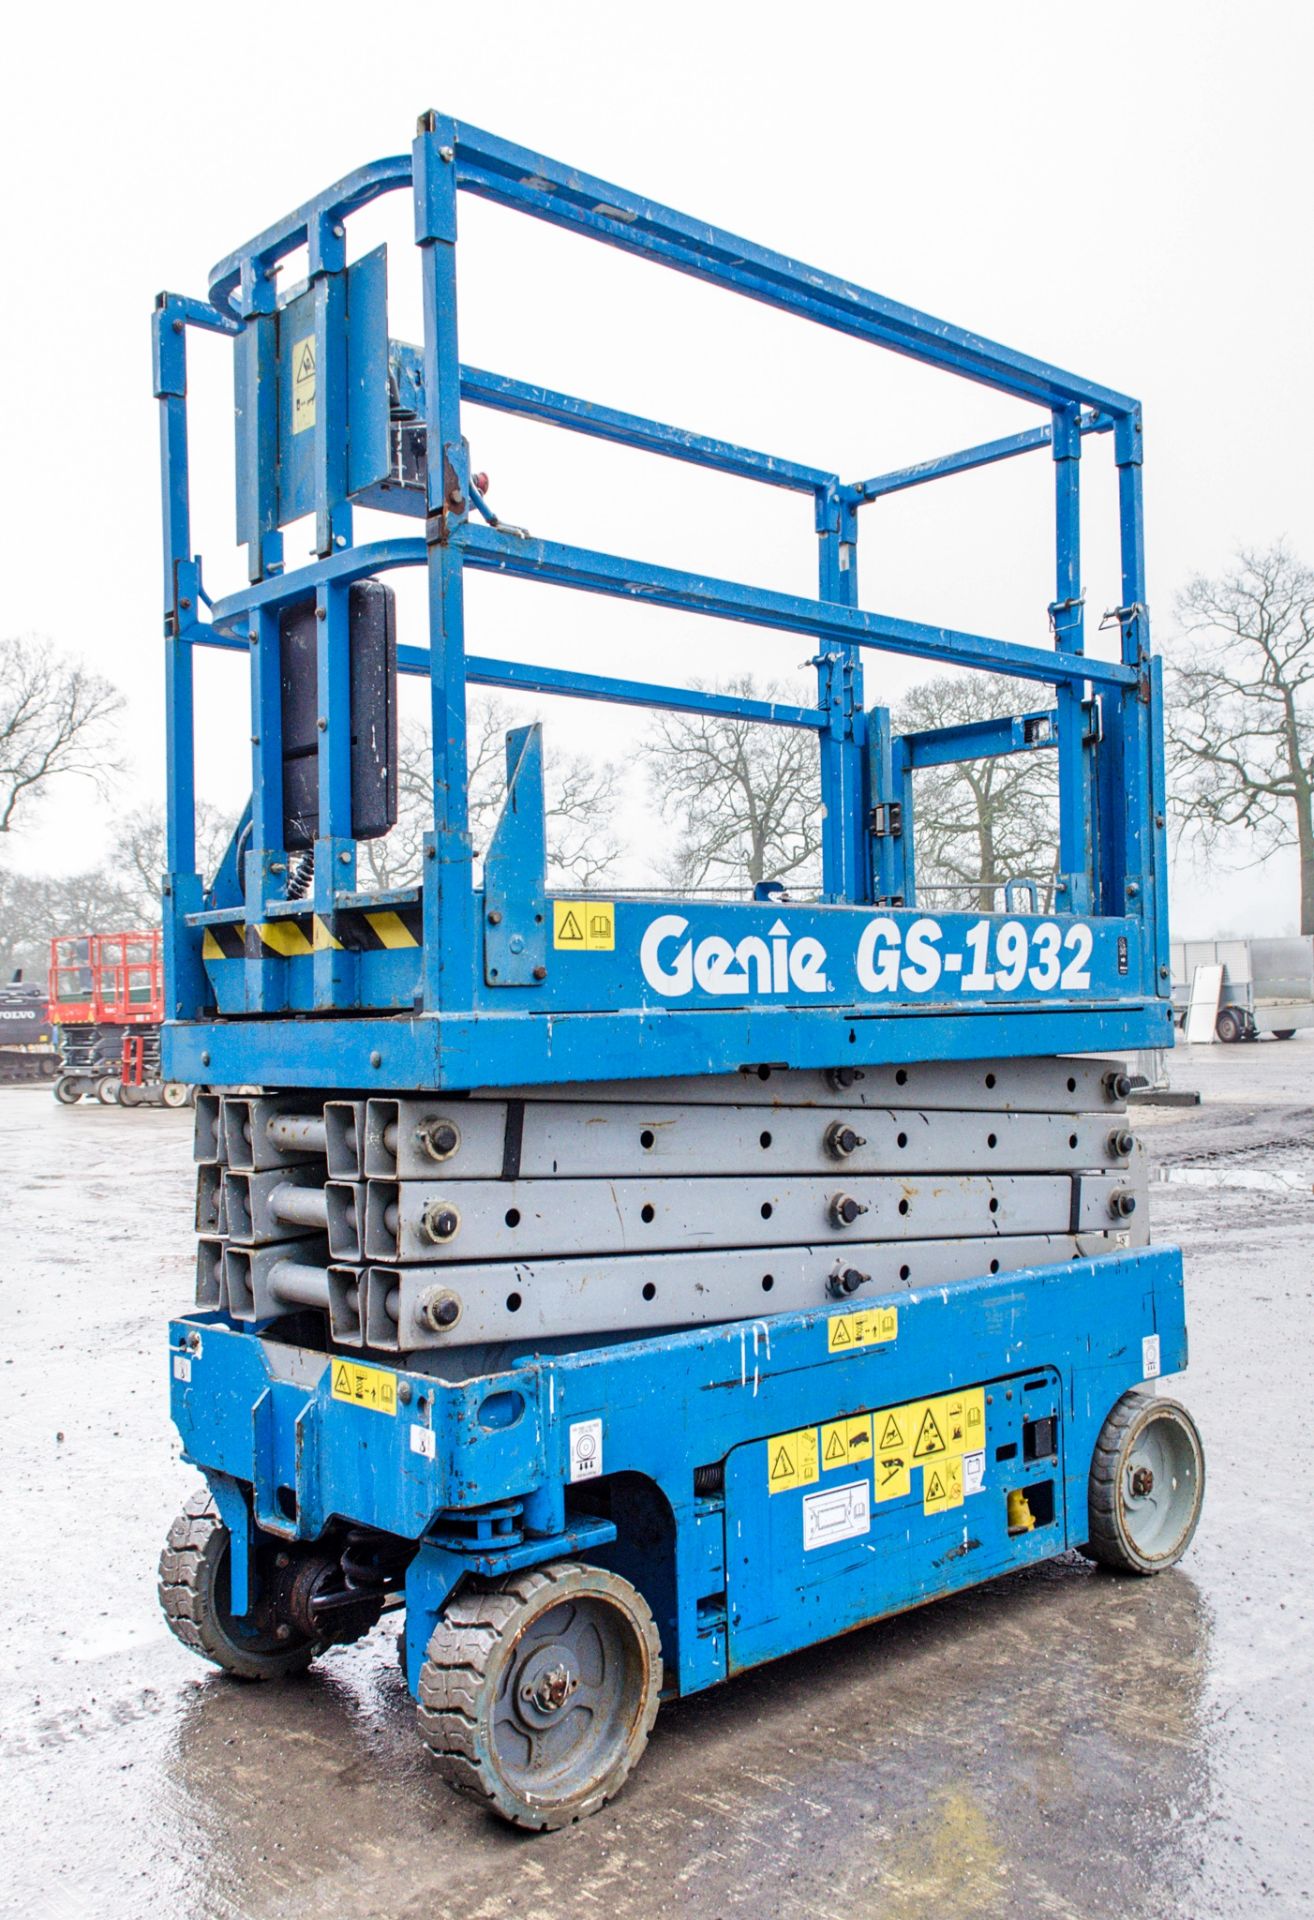 Genie GS1932 battery electric scissor lift Year: 2008 Recorded Hours: 291 S/N: 46201 - Image 2 of 6